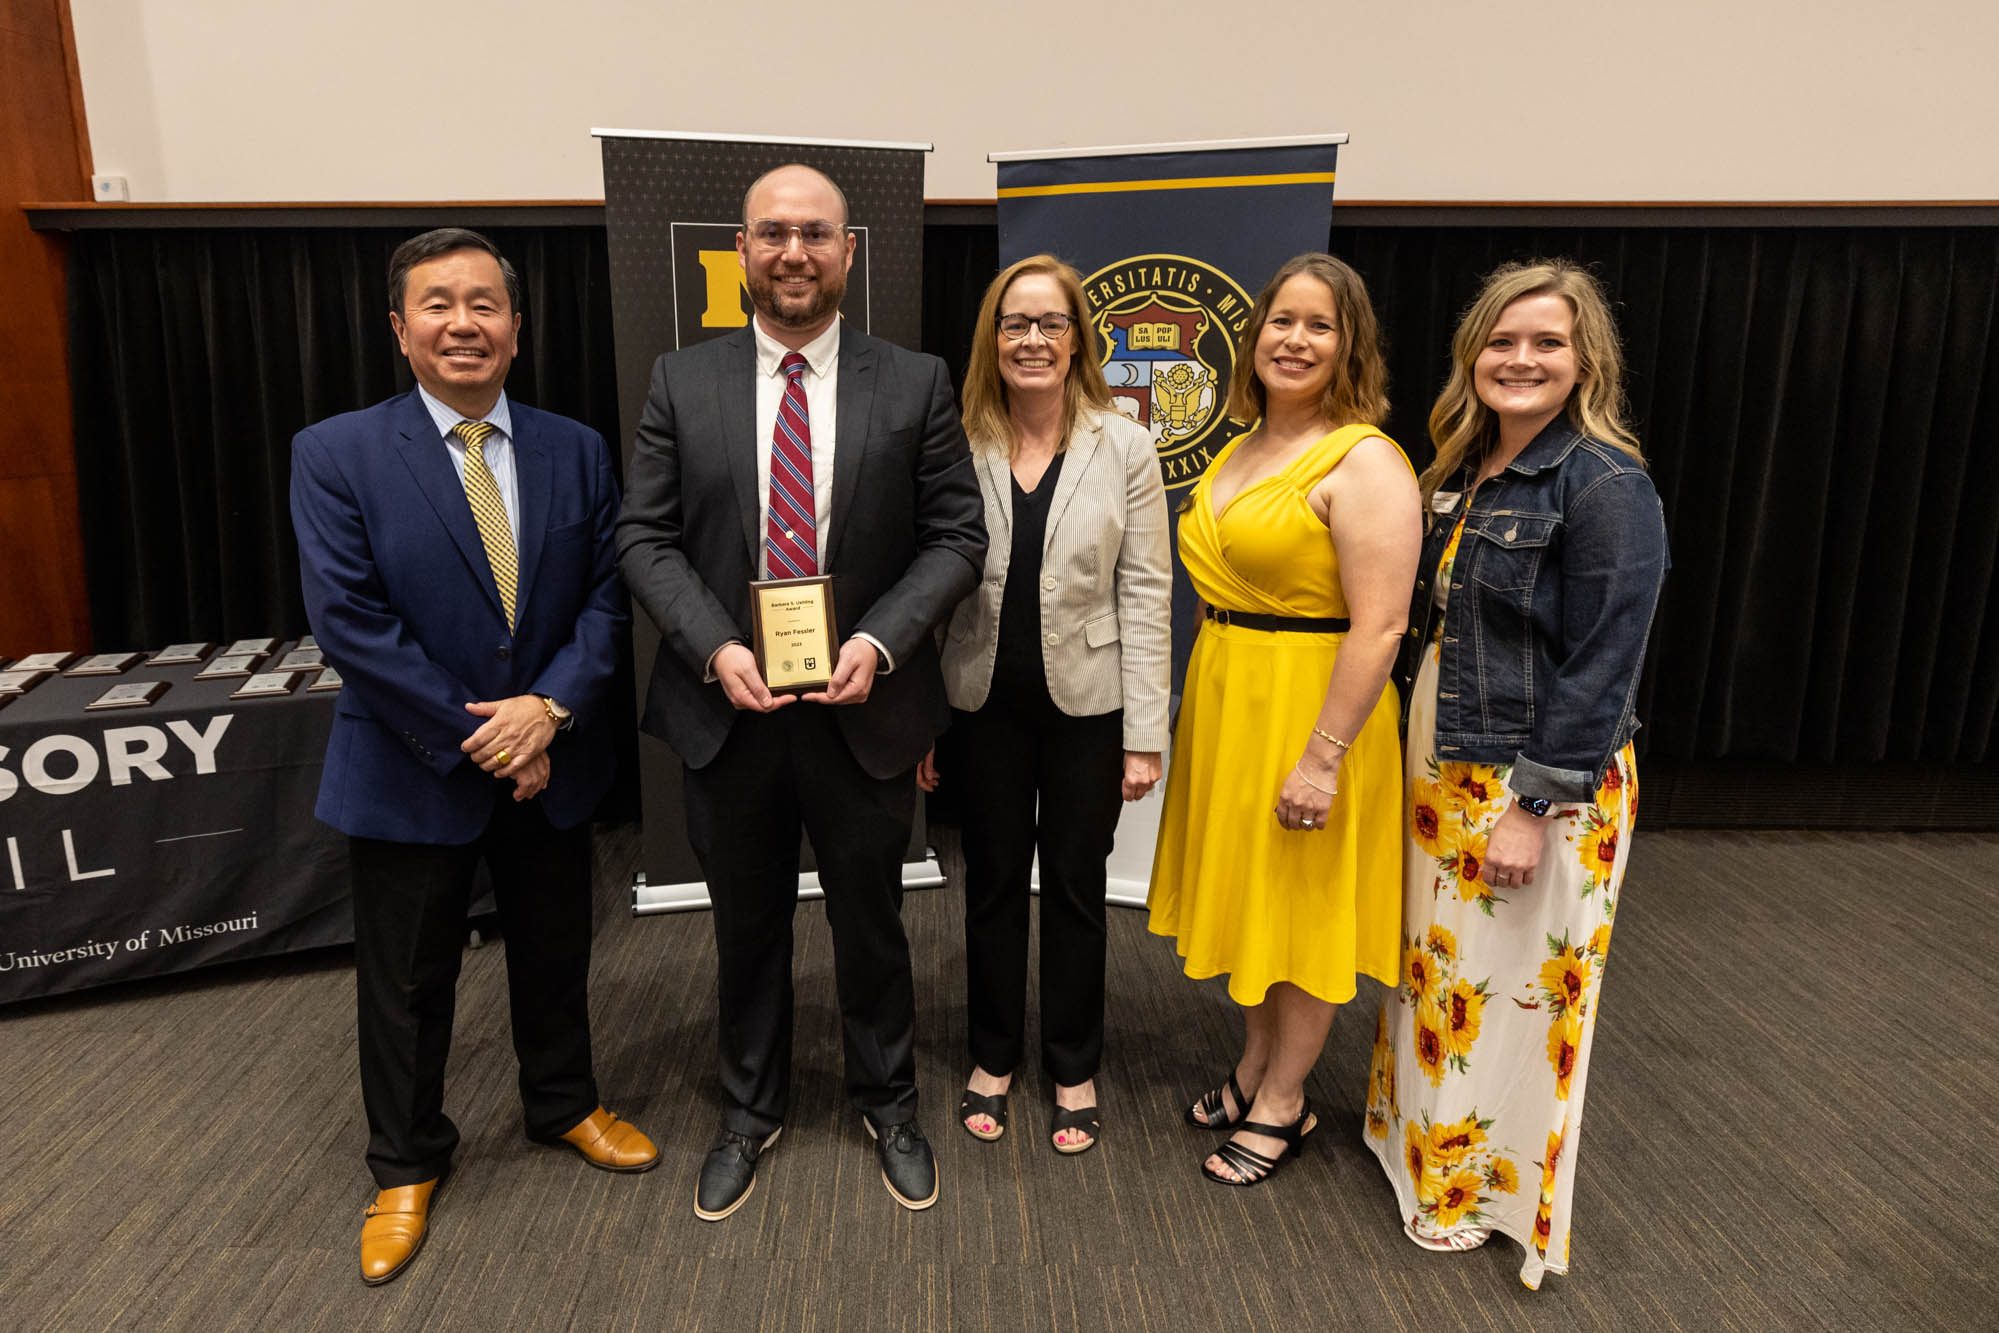 Barbara S. Uehling Award for Administrative Excellence: Ryan Fessler – Office of Research